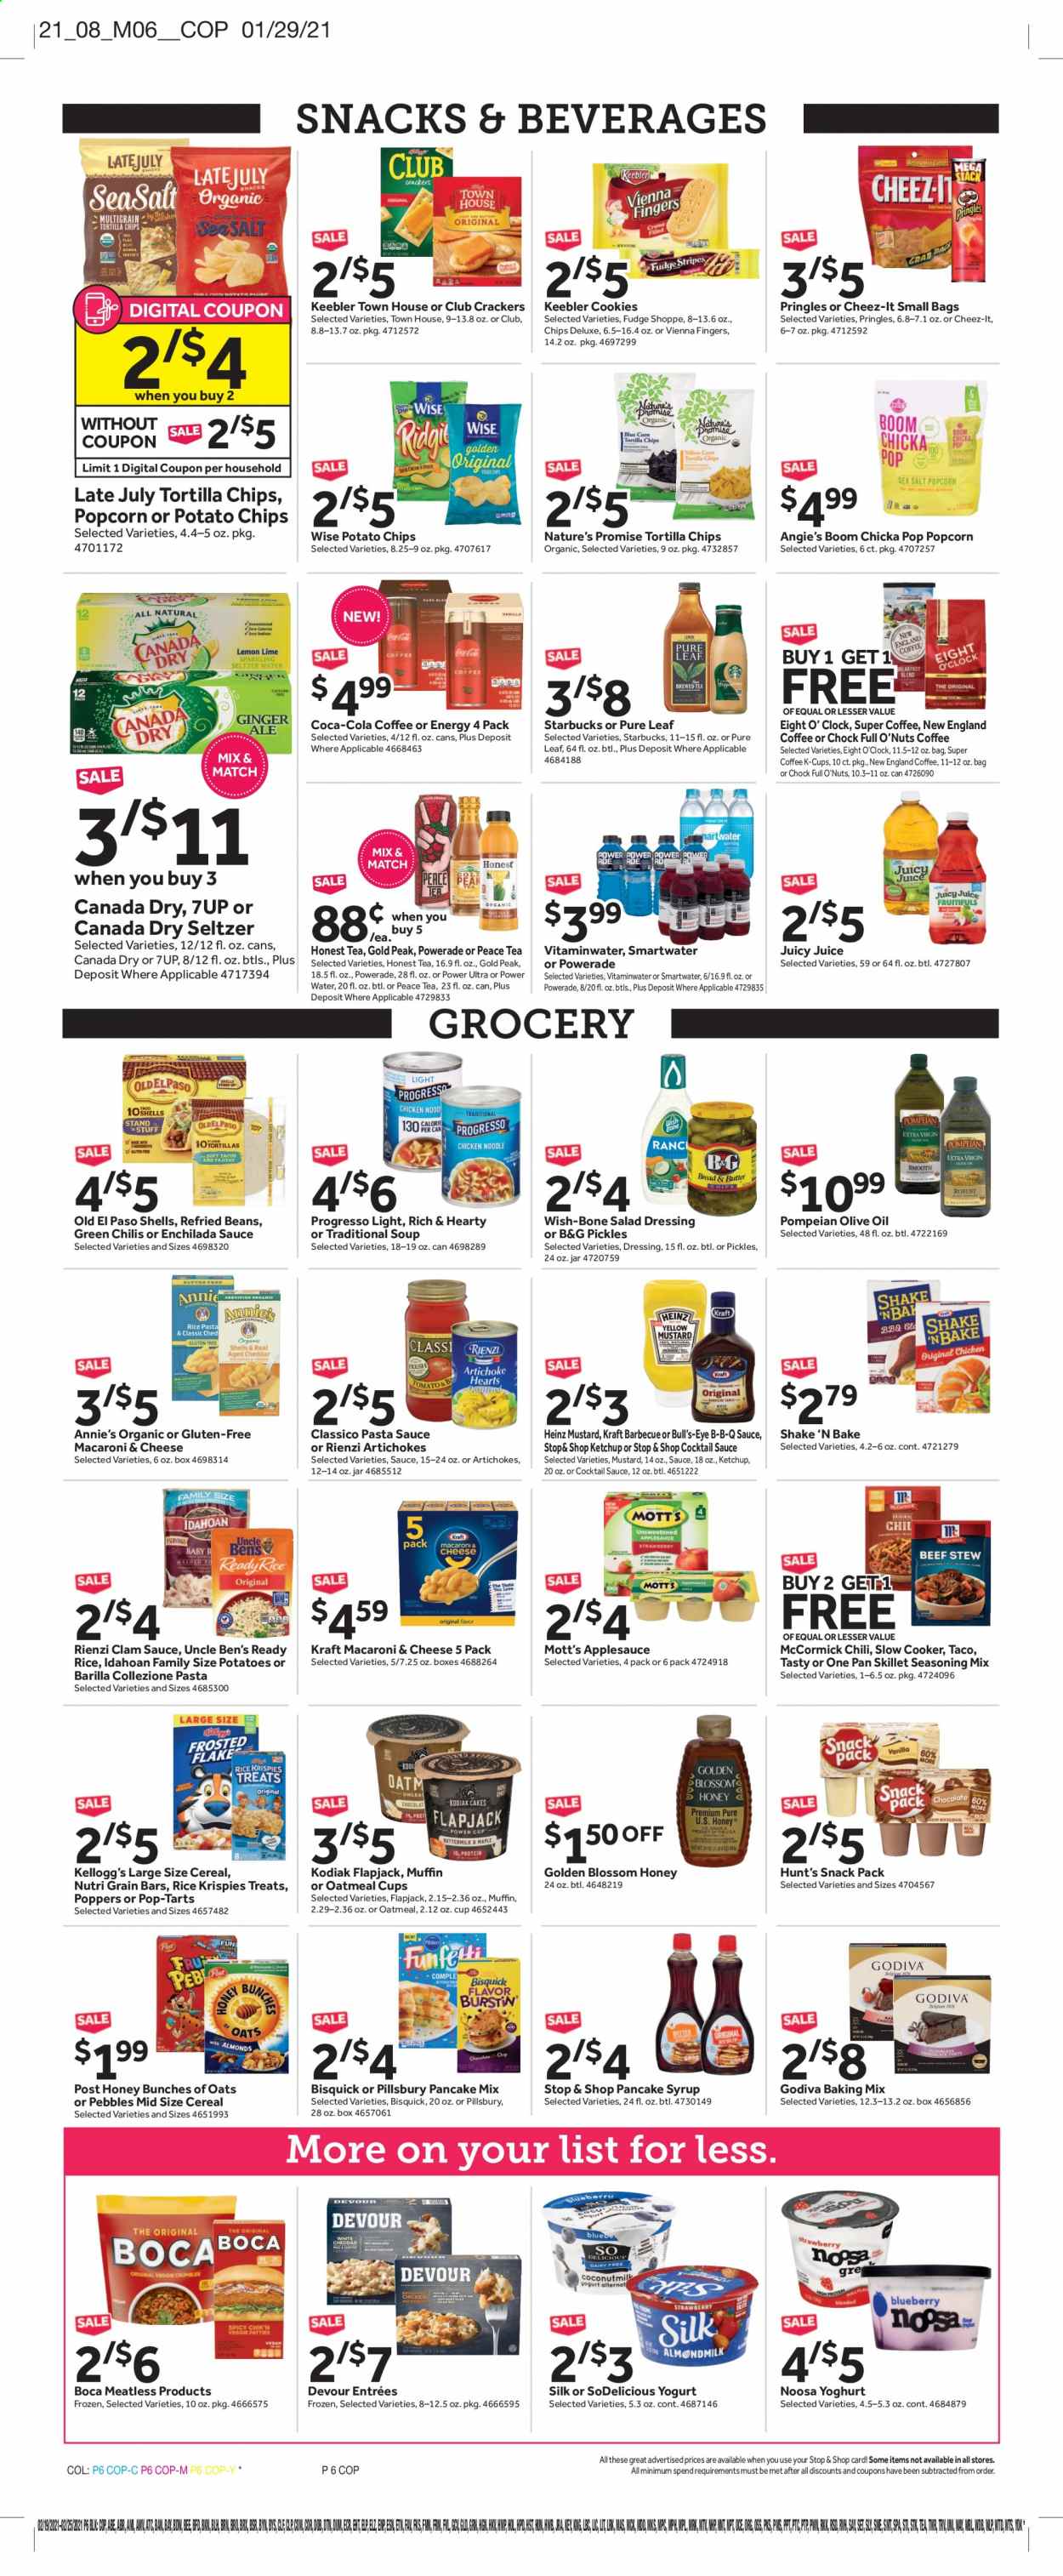 thumbnail - Stop & Shop Flyer - 02/19/2021 - 02/25/2021 - Sales products - Old El Paso, Nature’s Promise, cake, muffin, clams, enchiladas, macaroni & cheese, soup, Pillsbury, Barilla, Progresso, Annie's, Kraft®, yoghurt, almond milk, Silk, shake, Blossom, beans, pickles, Devour, cookies, fudge, vienna fingers, Godiva, crackers, Kellogg's, Pop-Tarts, Keebler, tortilla chips, potato chips, Pringles, popcorn, Cheez-It, Bisquick, oatmeal, oats, salt, enchilada sauce, refried beans, Heinz, Uncle Ben's, cereals, Rice Krispies, Nutri-Grain, cocktail sauce, mustard, salad dressing, ketchup, pasta sauce, dressing, olive oil, apple sauce, pancake syrup, syrup, Canada Dry, Coca-Cola, ginger ale, Powerade, juice, 7UP, Mott's, seltzer water, tea, Pure Leaf, coffee, Starbucks, coffee capsules, K-Cups. Page 8.